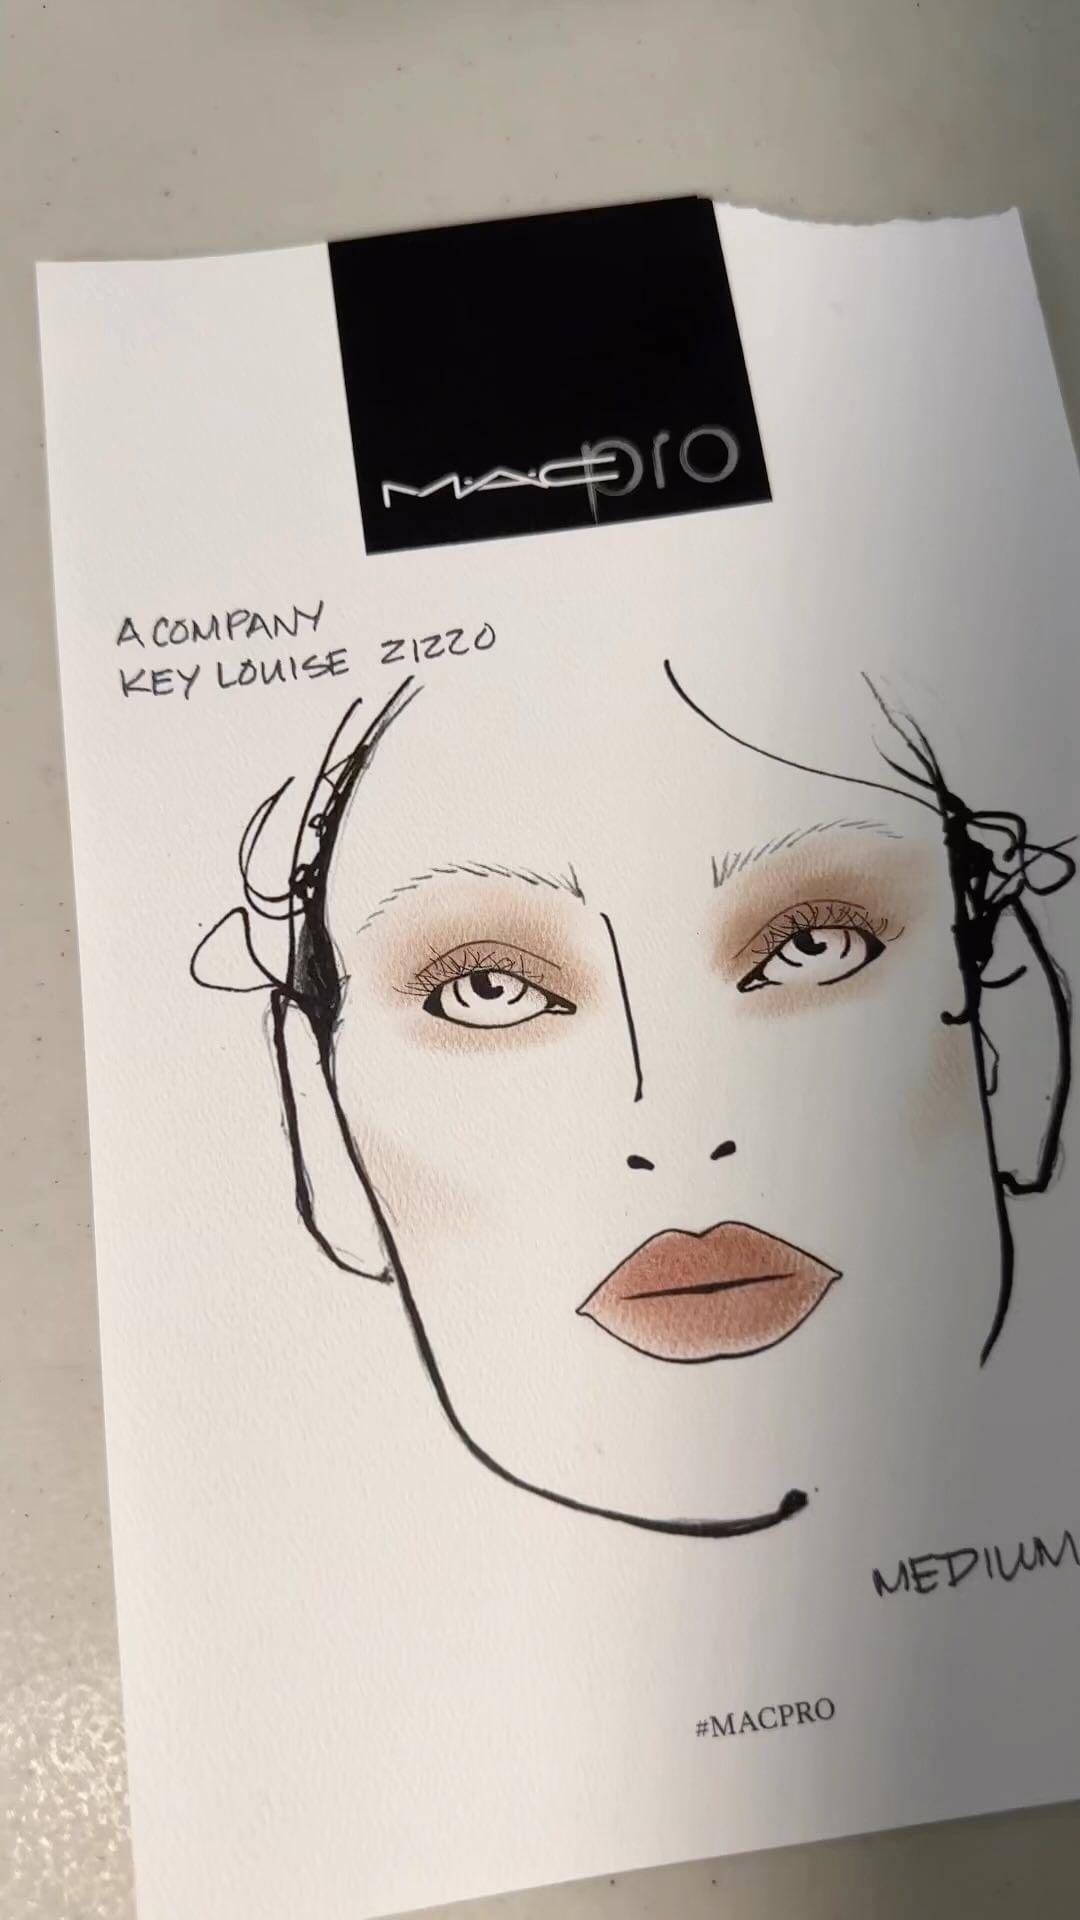 class="content__text"@a____company Makeup design @lzizzo for @maccosmetics “The moody side of the 90’s” Tauped out browns and nudes with blurred edges. Photography @photozo@MACPRO@MACCOSMETICS.COM 
 #NYFW
 #MACBACKSTAGE
 #MACHYPERREAL
 #MACSTACKMASCARA
 #MACLOCKEDKISSINK
 #MACFIXPLUS
 #MACSTUDIOFIX 
 